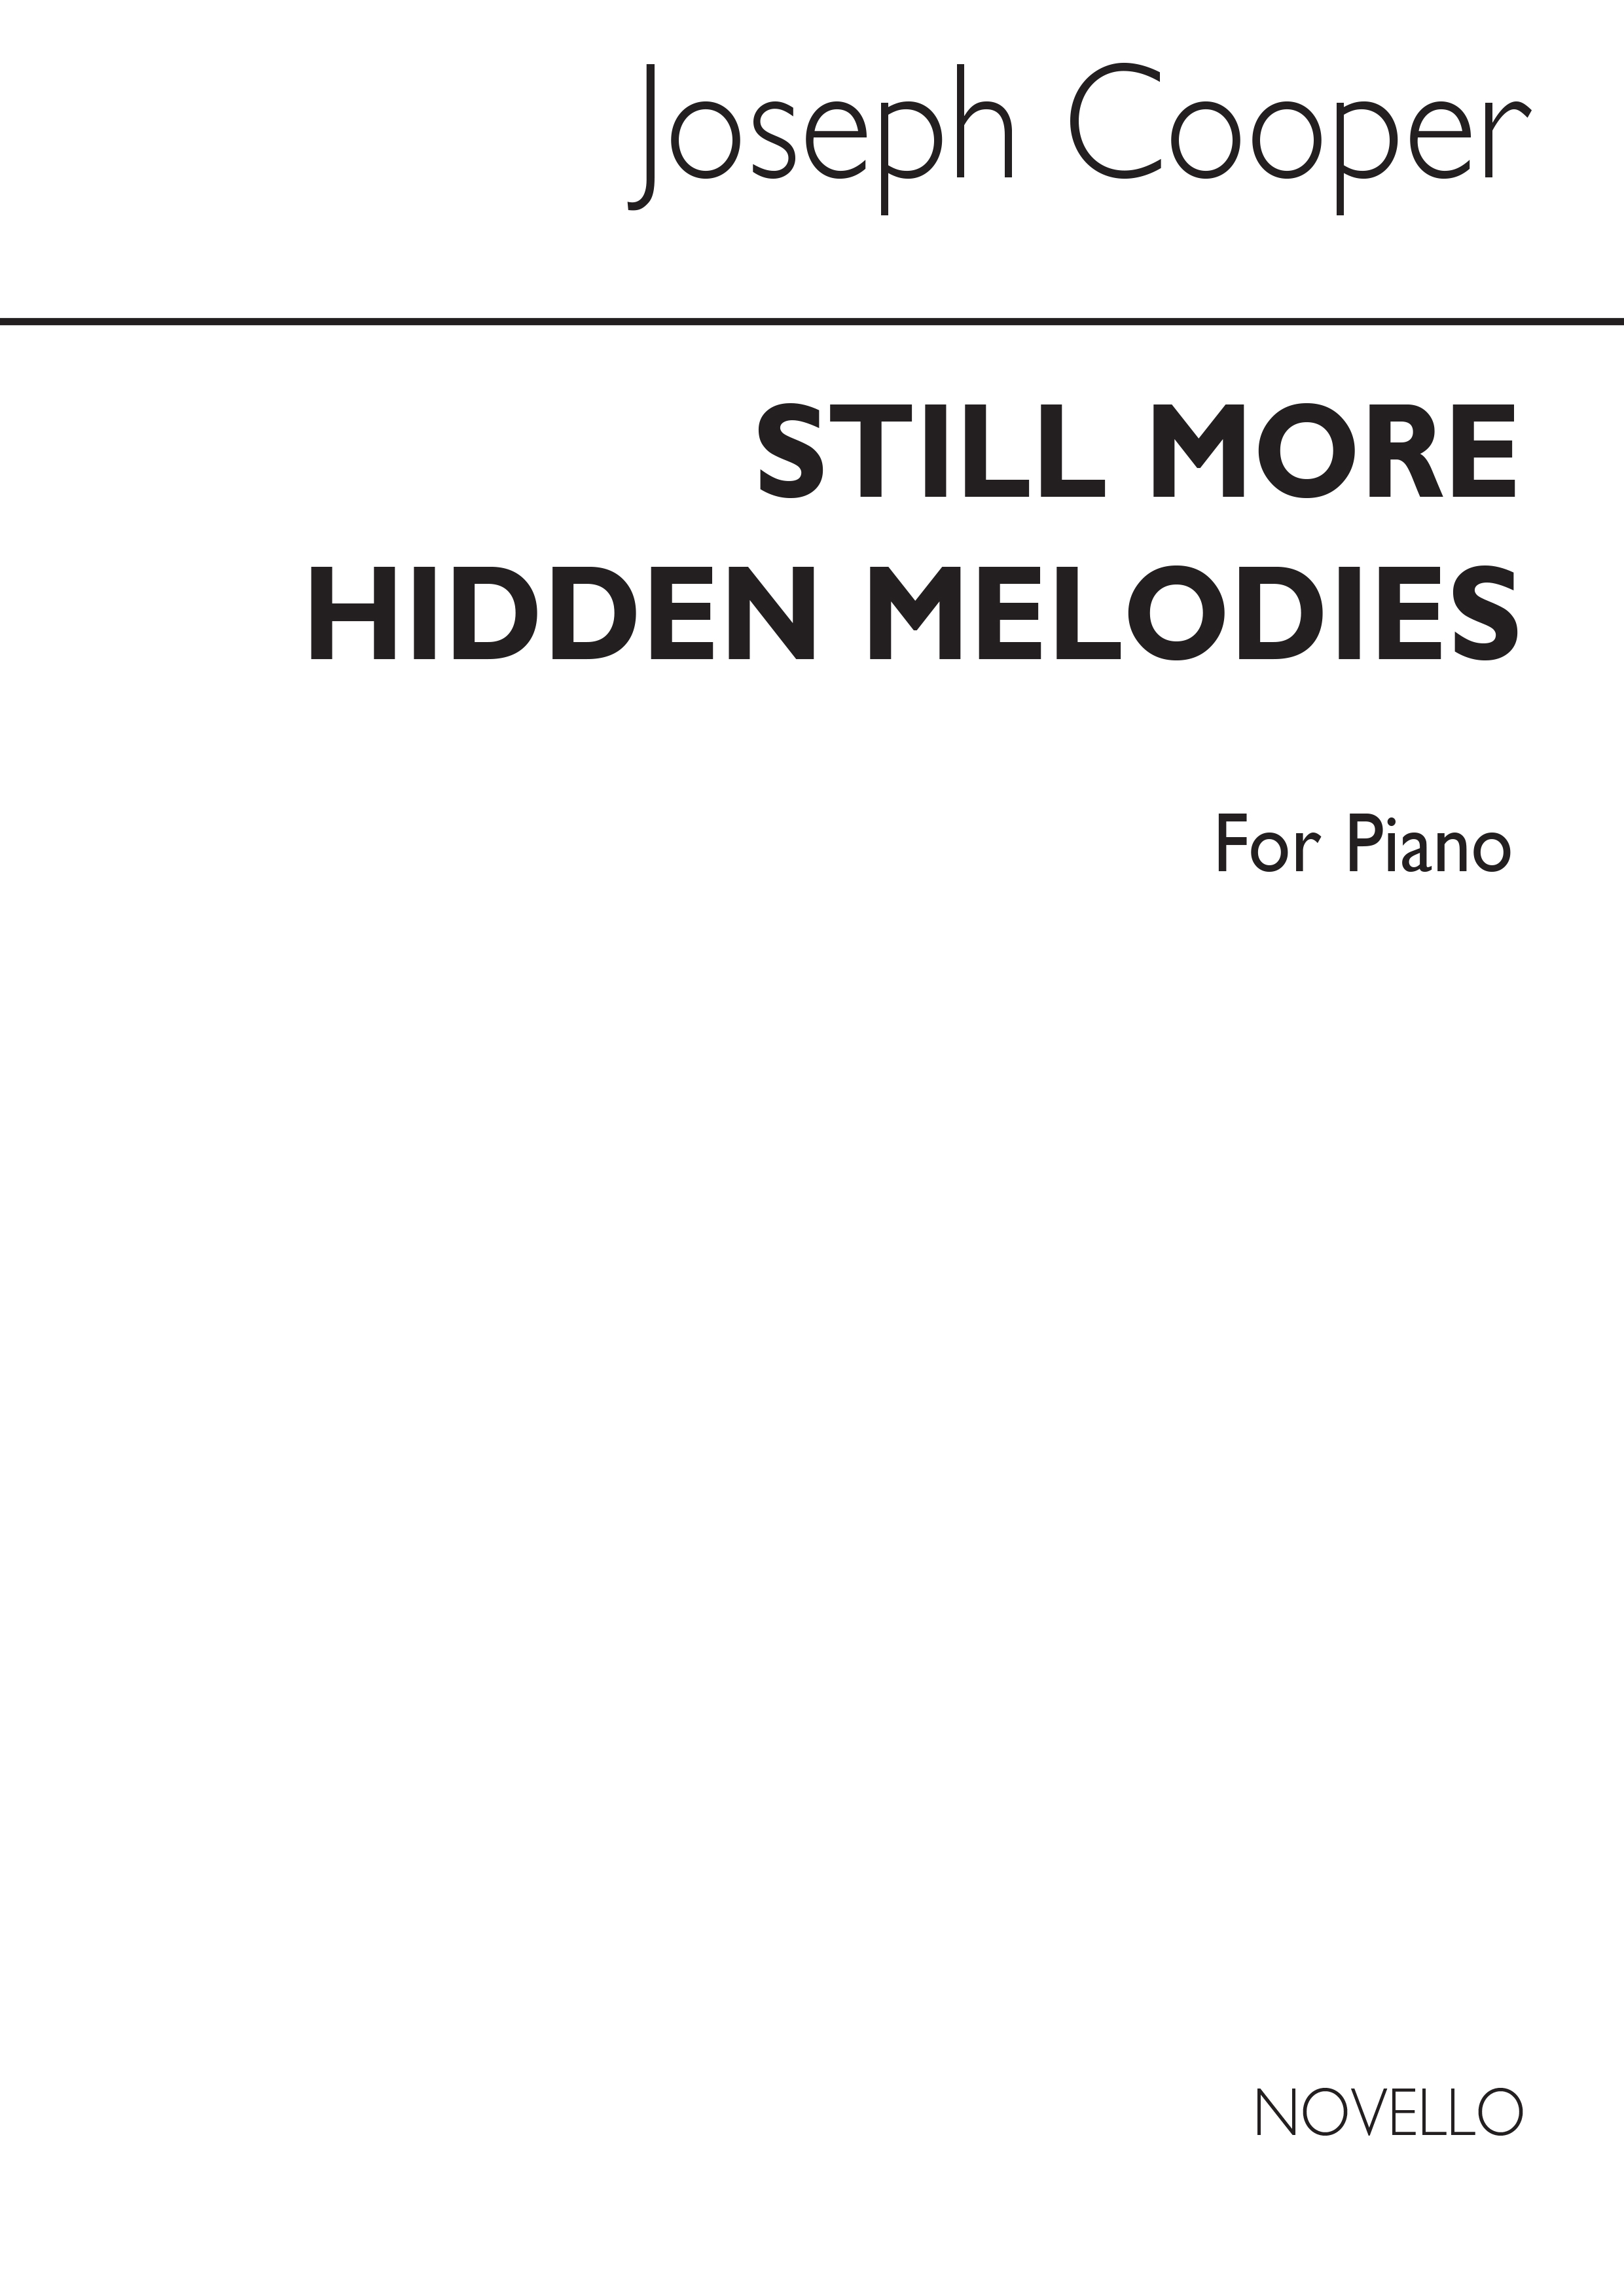 Cooper: Still More Hidden Melodies for Piano